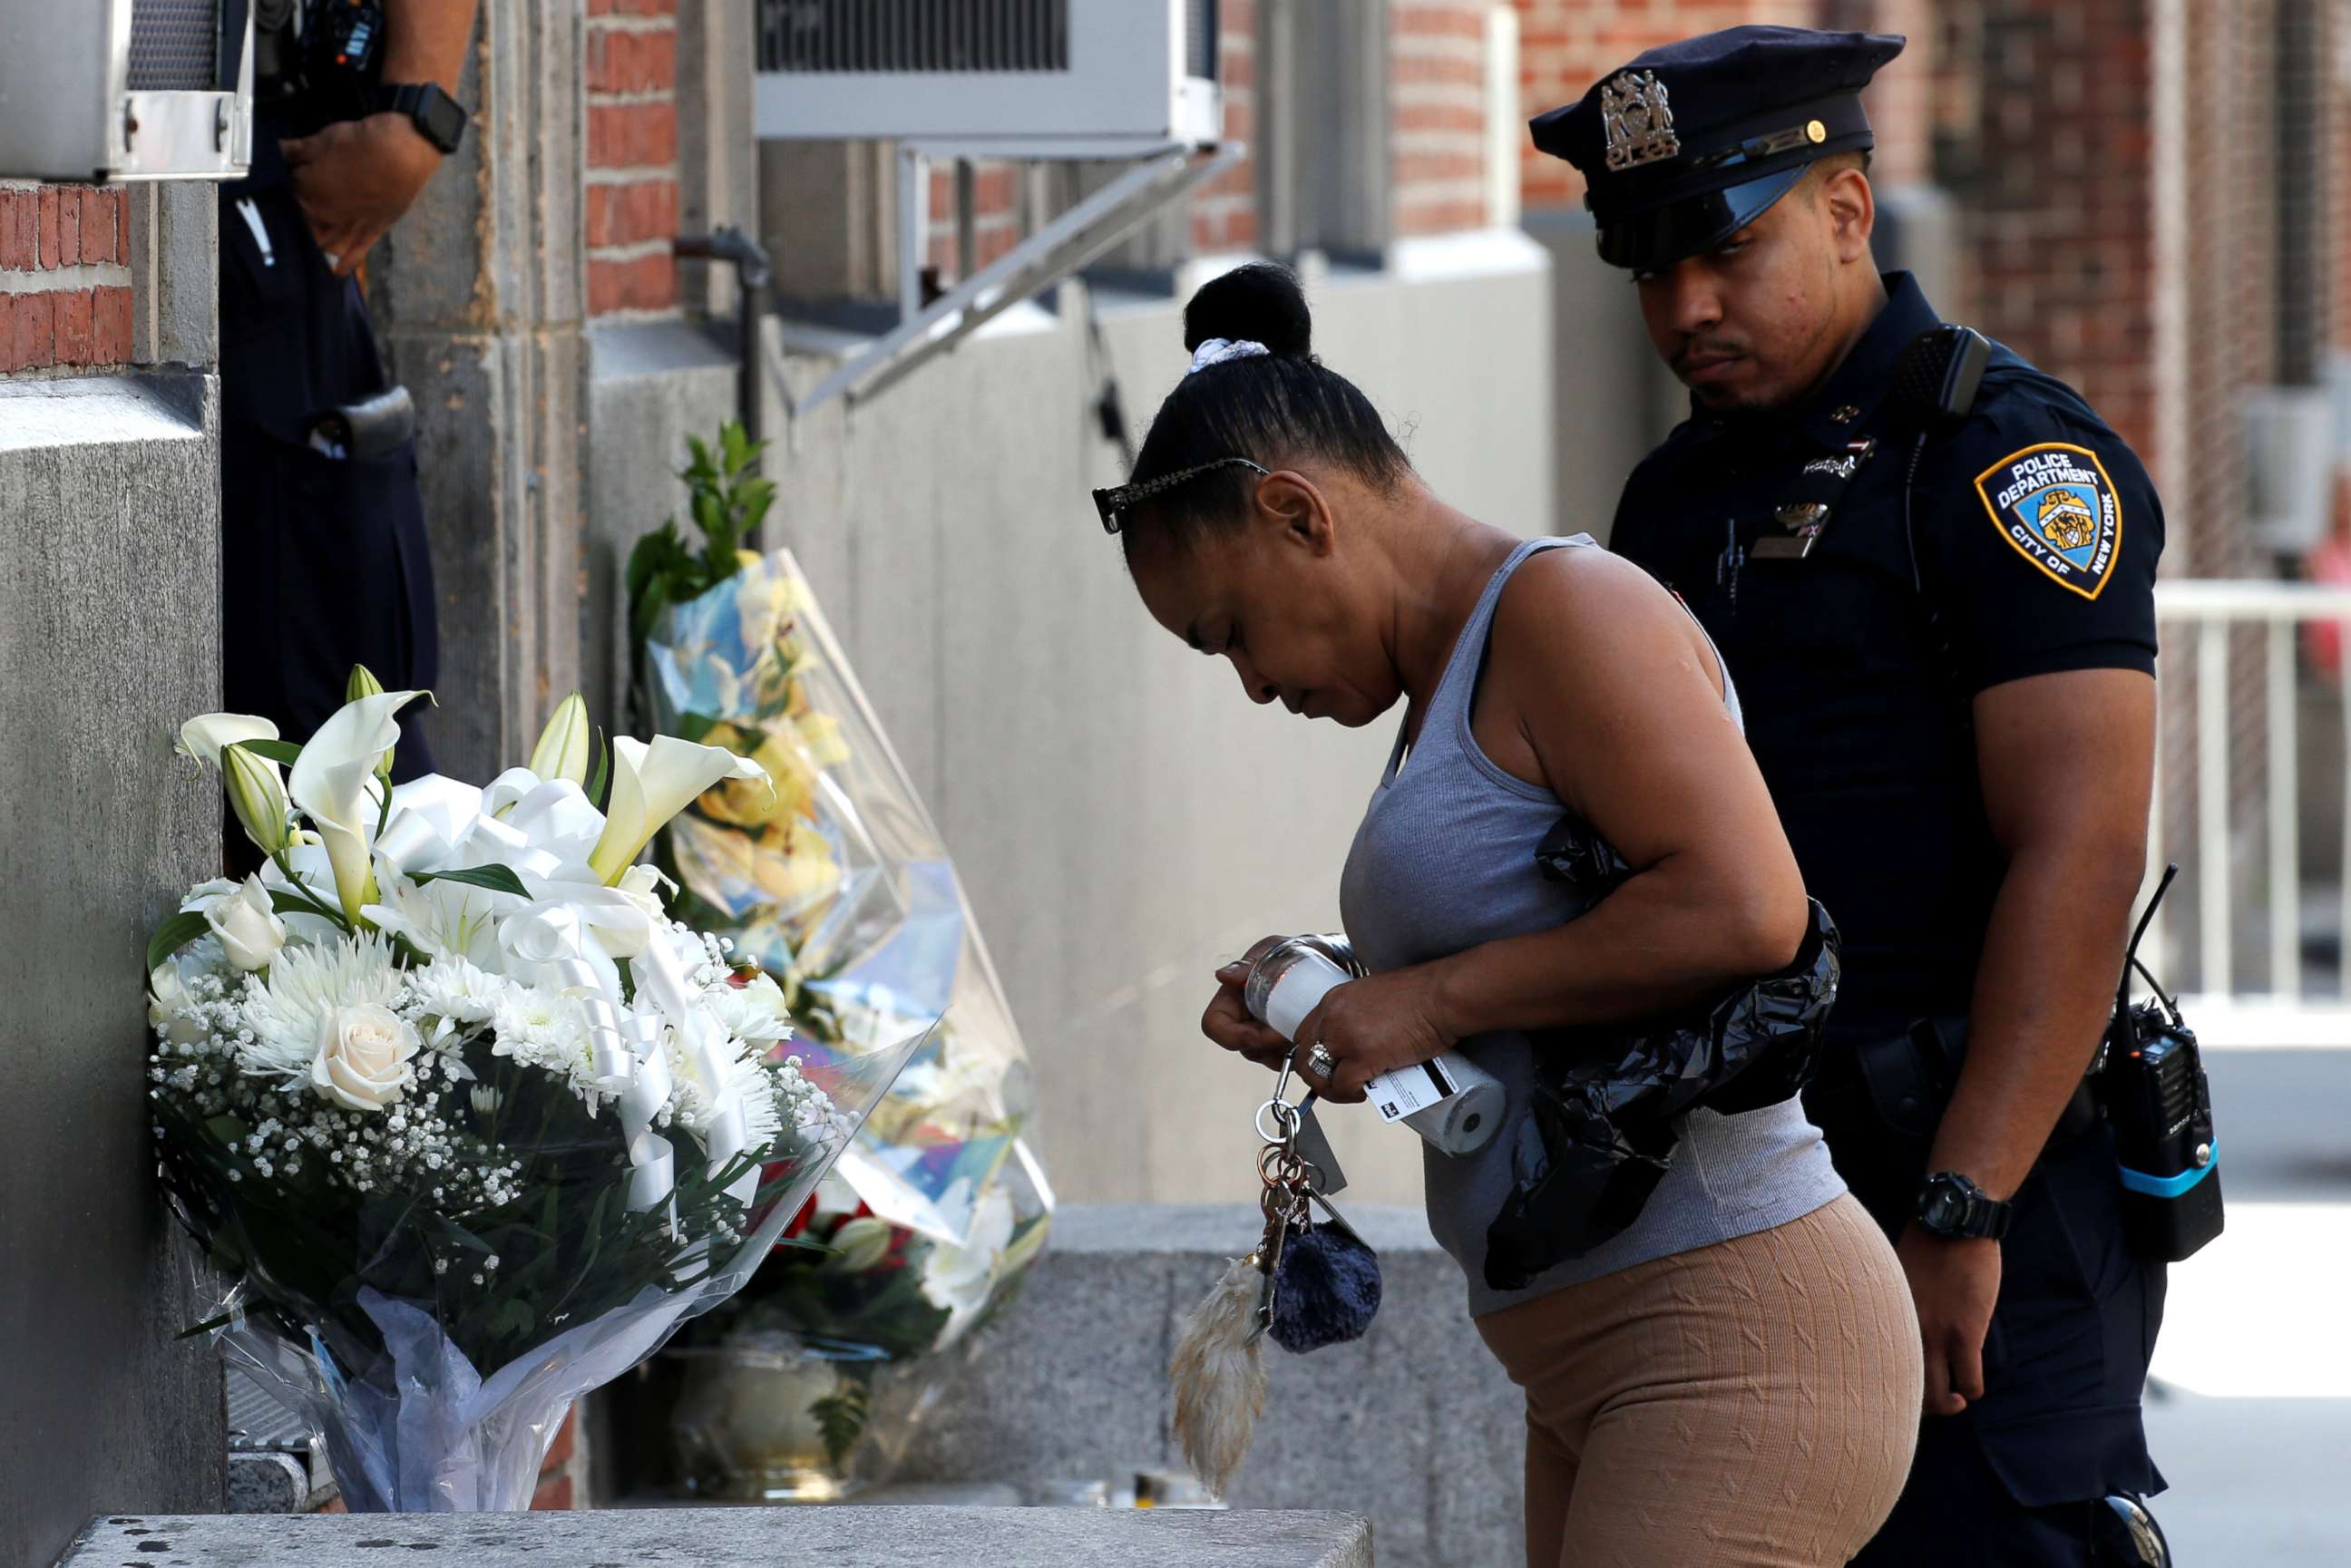 PHOTO: Local resident Maria Ramos places a candle at a makeshift memorial outside the New York City Police Department's 46th precinct after a gunman fatally shot a female officer in an unprovoked attack in the Bronx, New York, on July 5, 2017.